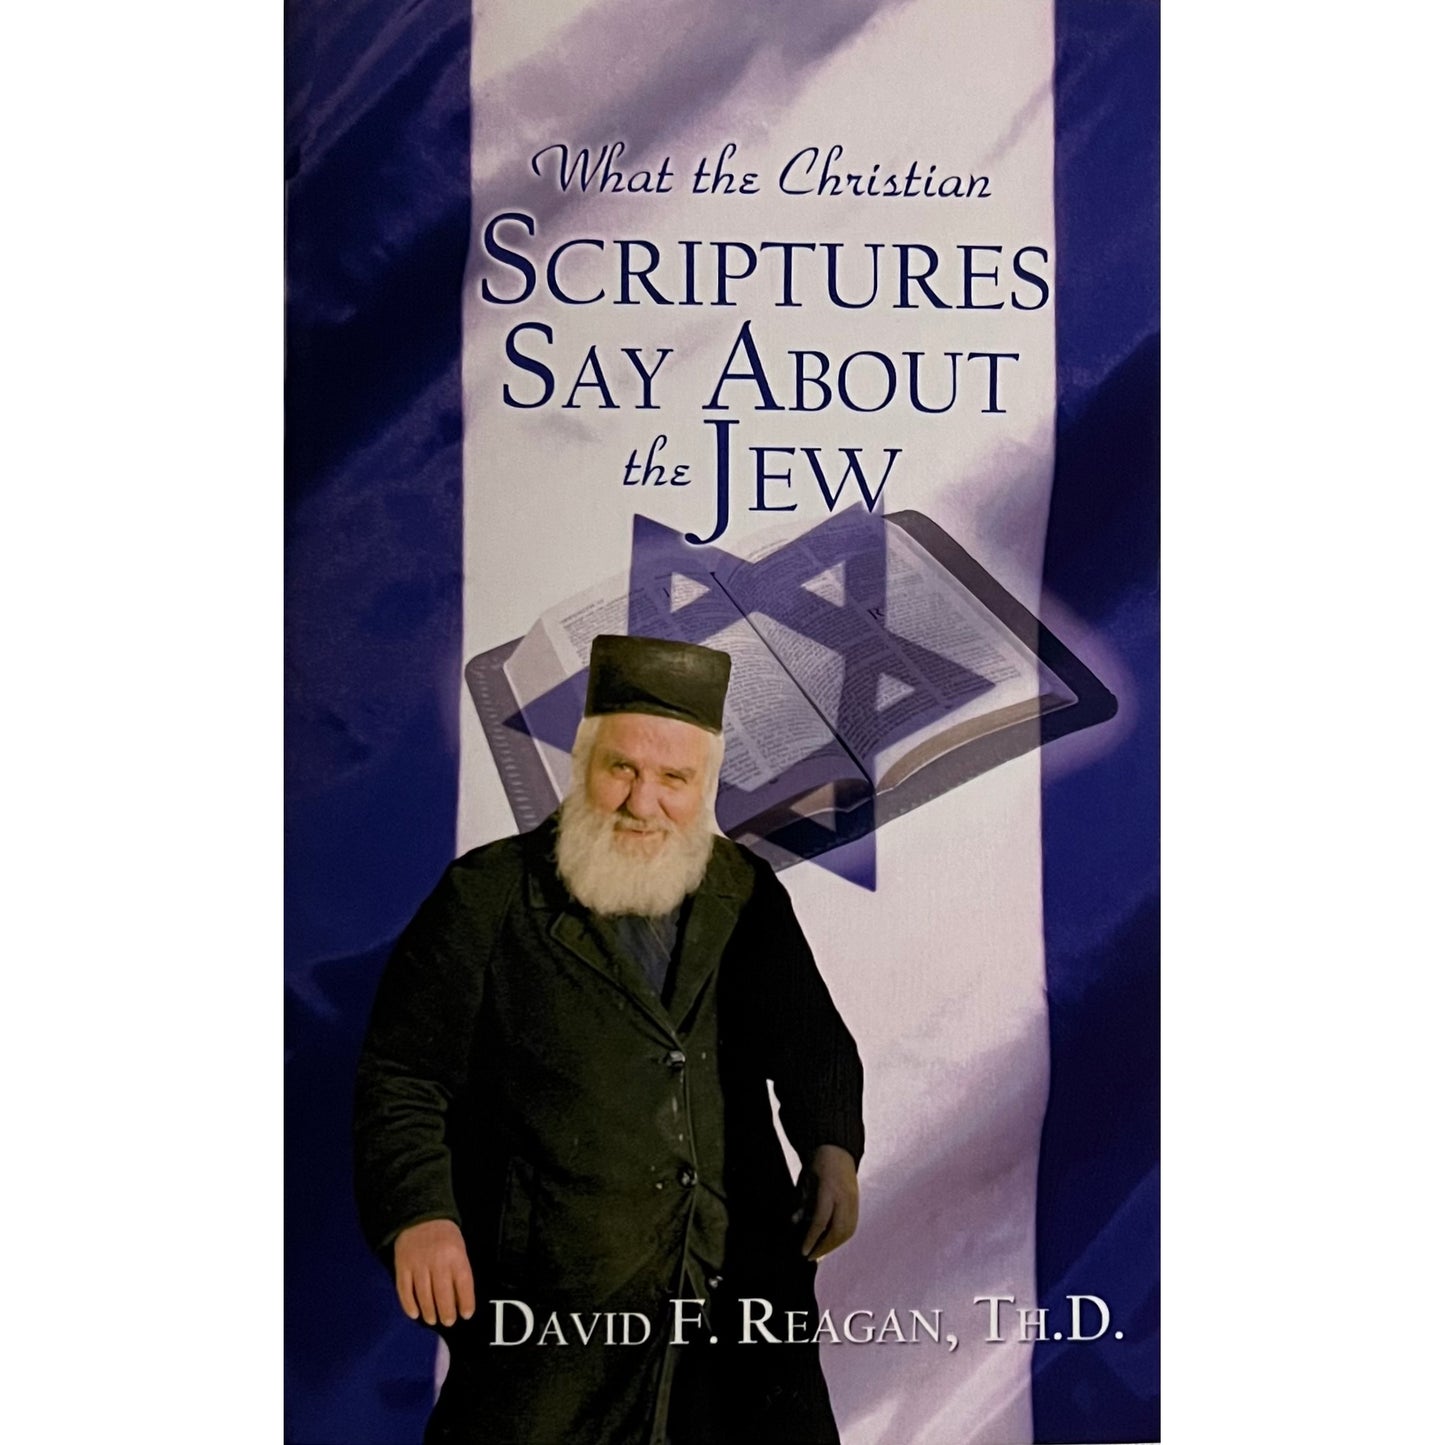 What the Christian Scriptures Say About the Jew